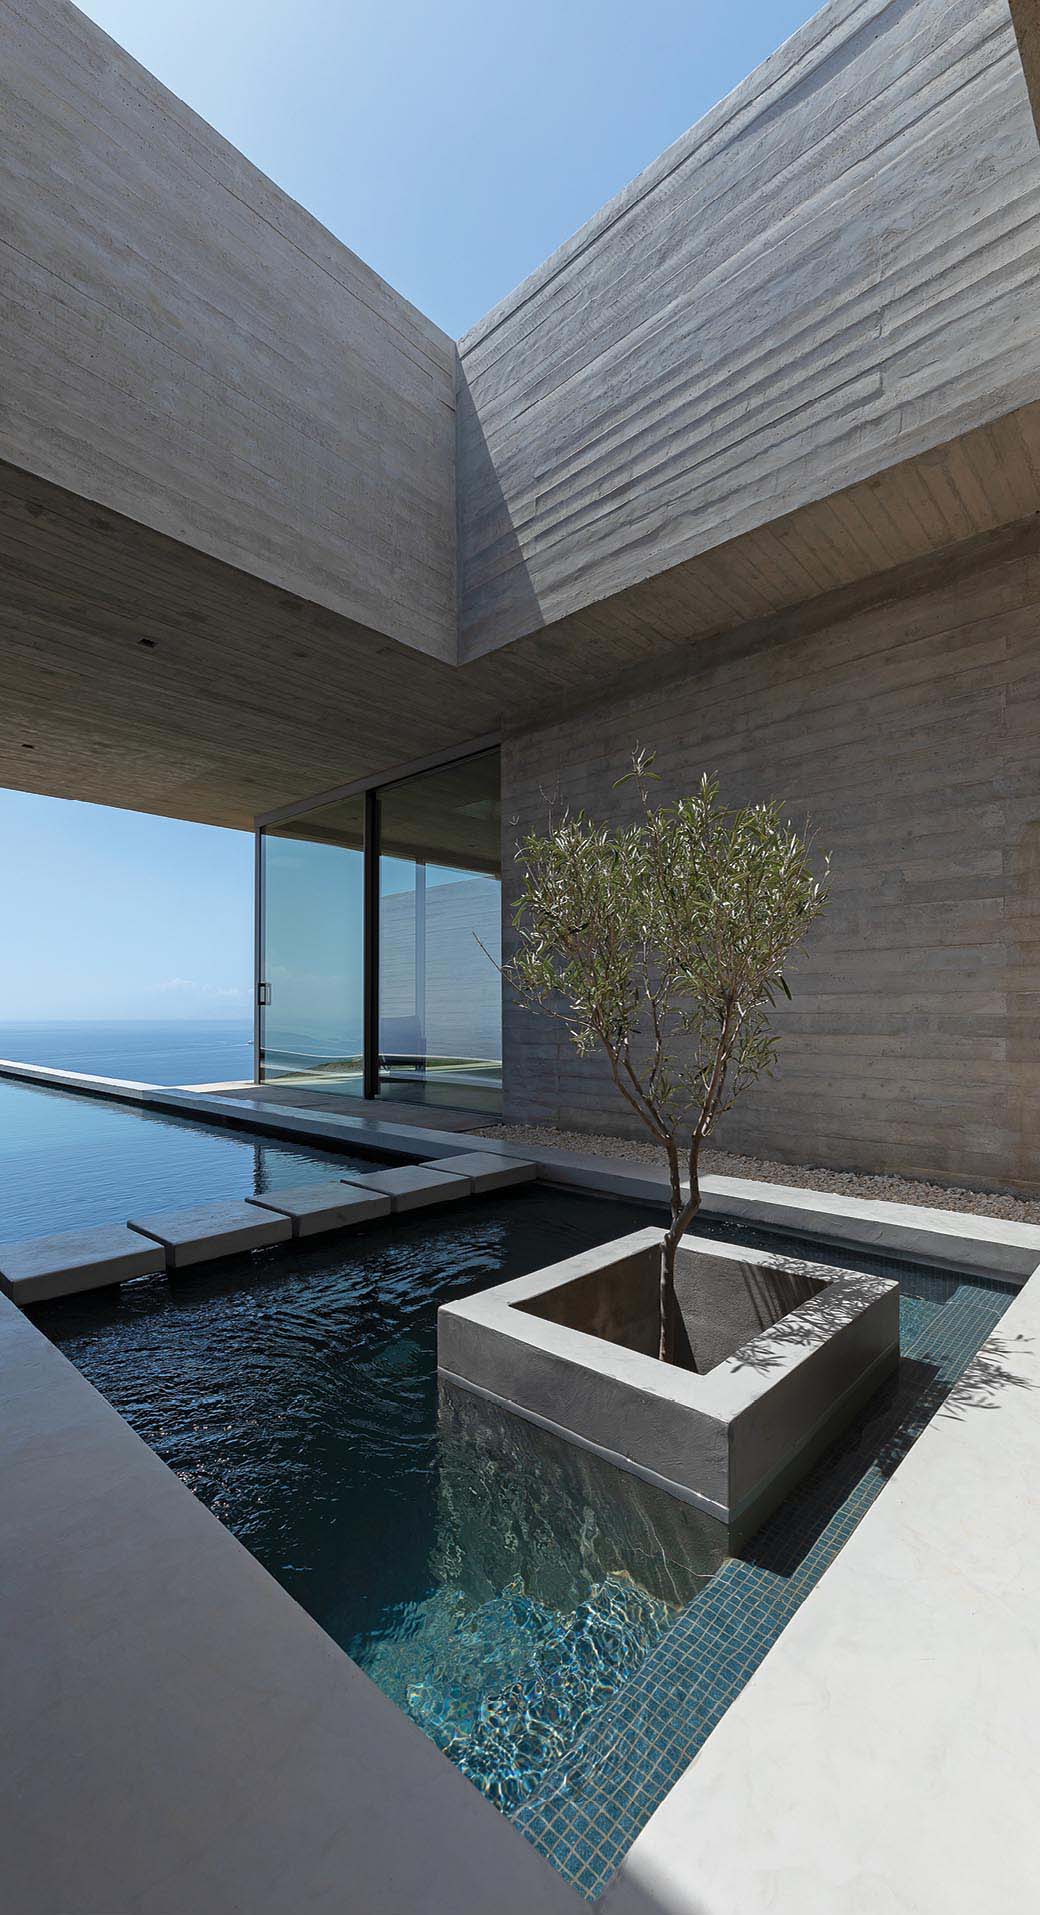 A modern concrete house with a linear swimming pool.